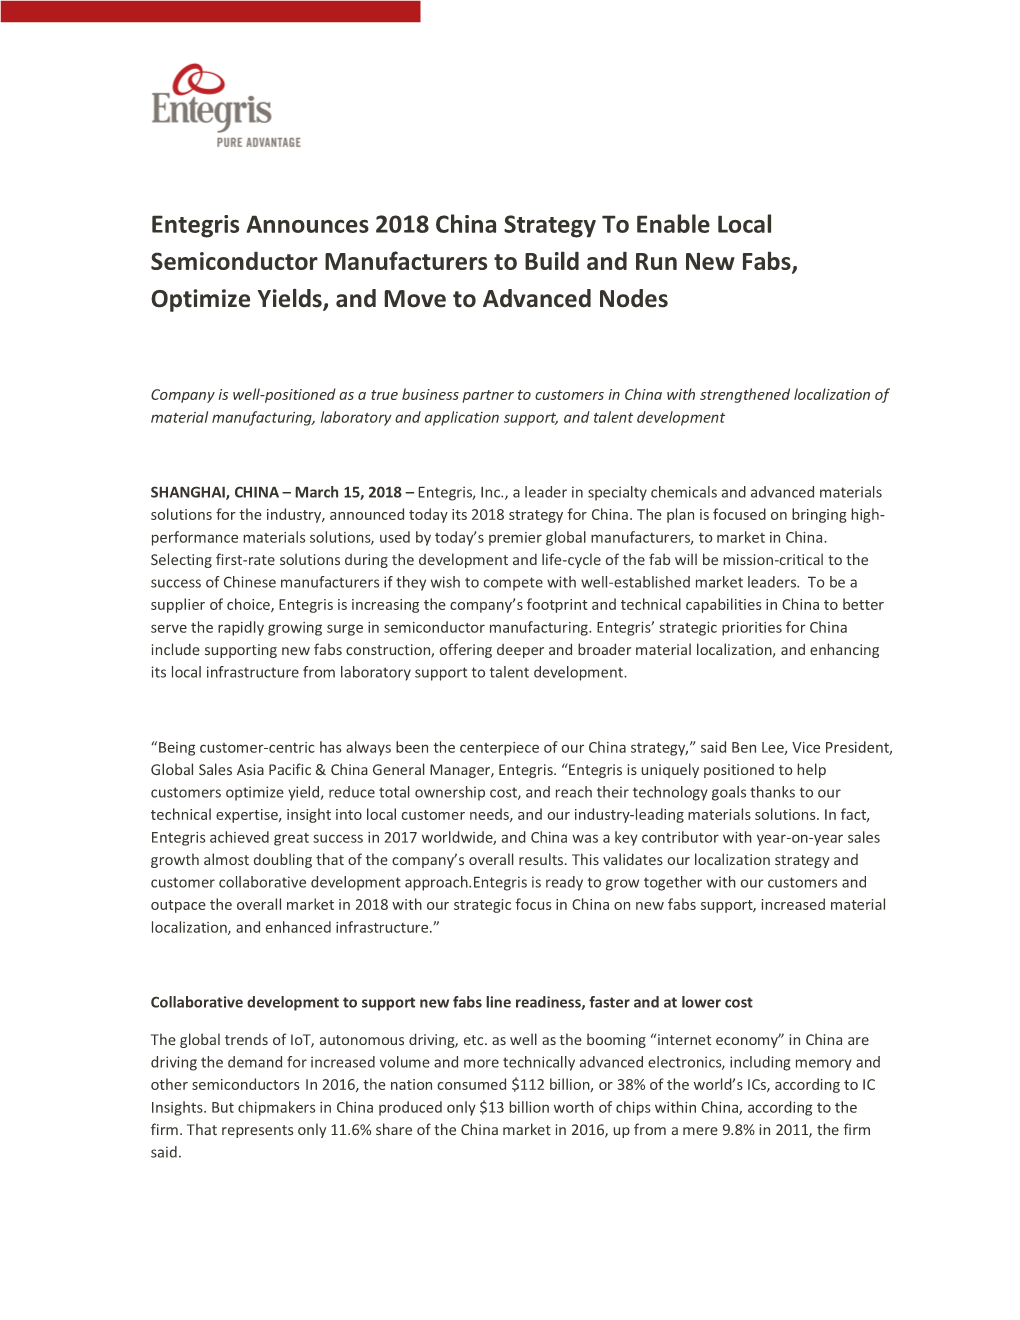 Entegris Announces 2018 China Strategy to Enable Local Semiconductor Manufacturers to Build and Run New Fabs, Optimize Yields, and Move to Advanced Nodes